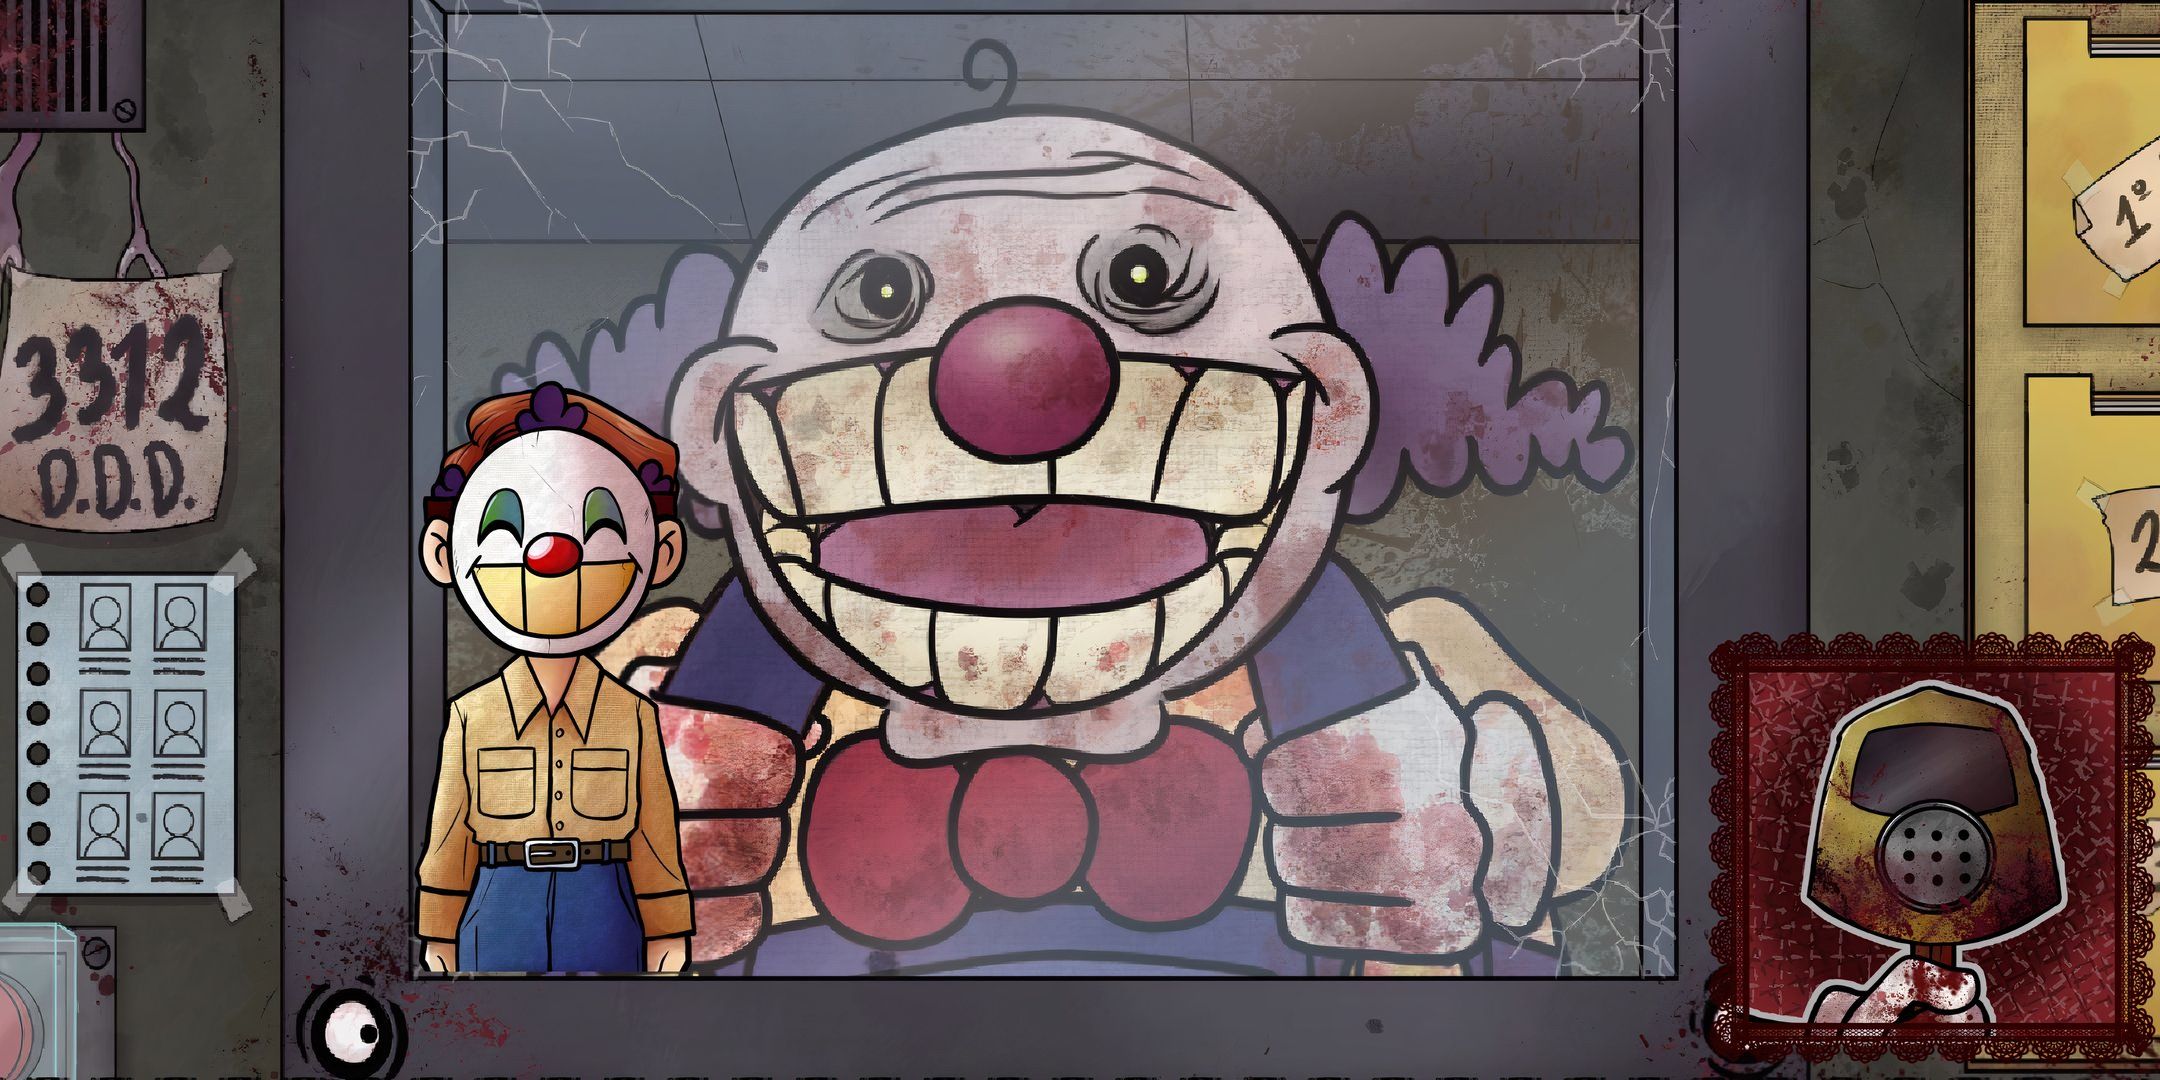 That's Not my Neighbor: An image of the Killer Clown laughing, juxtaposed with the regular clown and Nightmare Mode badge.